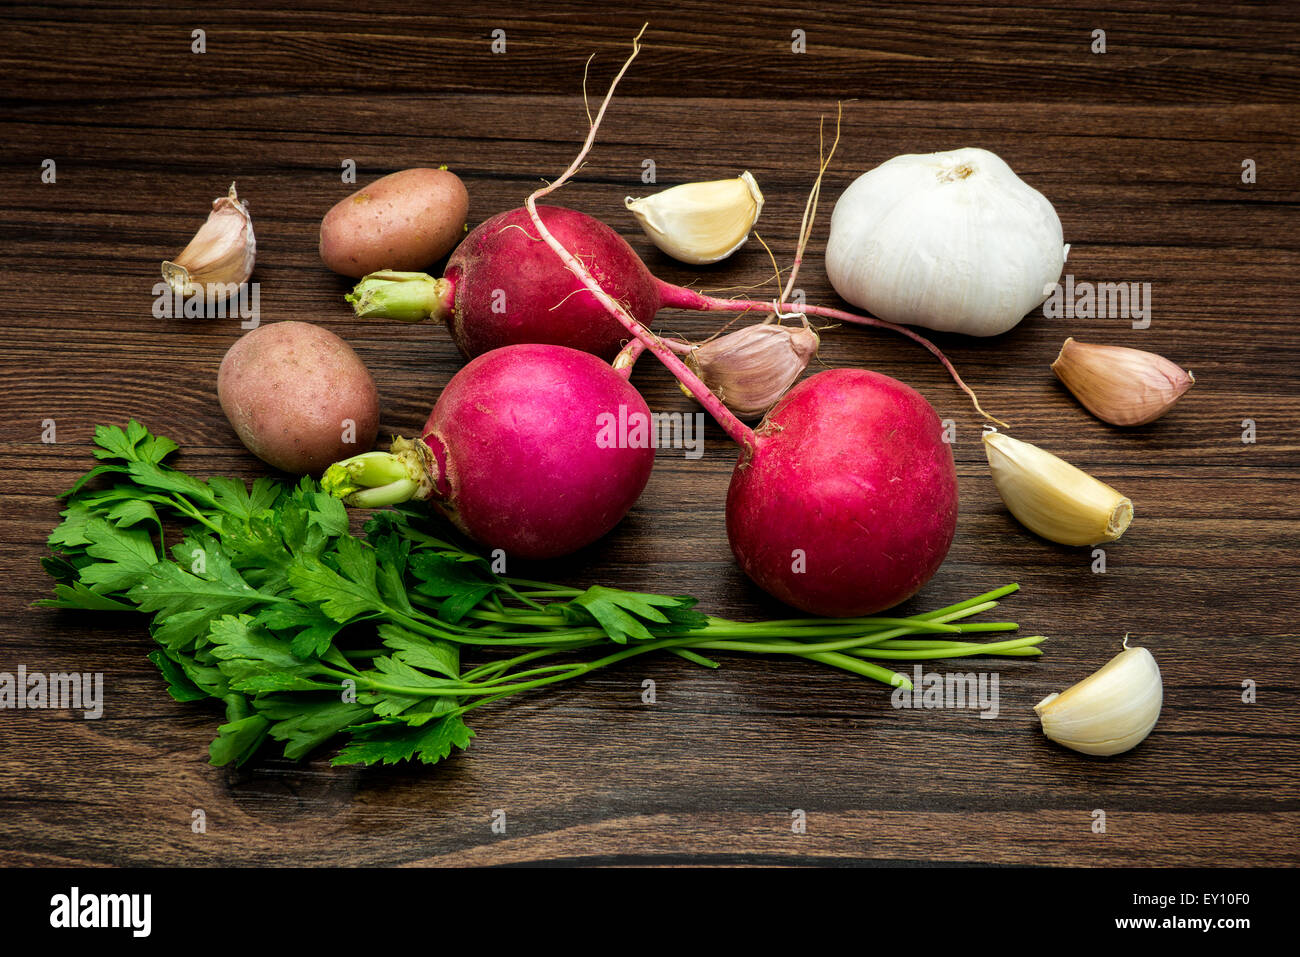 Vegetables still life on a wooden table brown color. Stock Photo